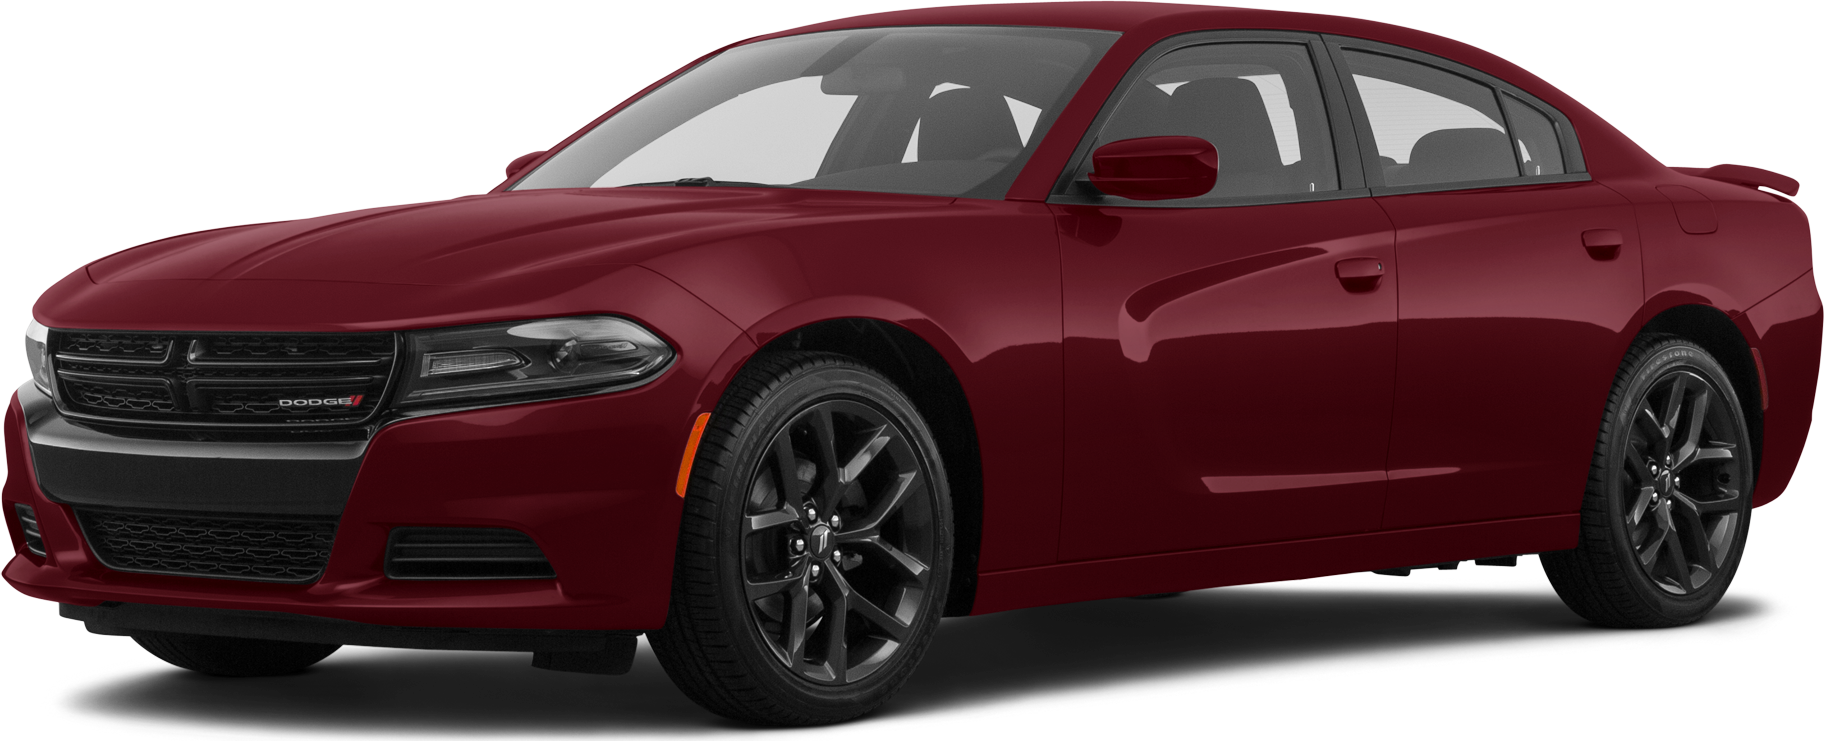 New 2021 Dodge Charger Reviews, Pricing & Specs Kelley Blue Book